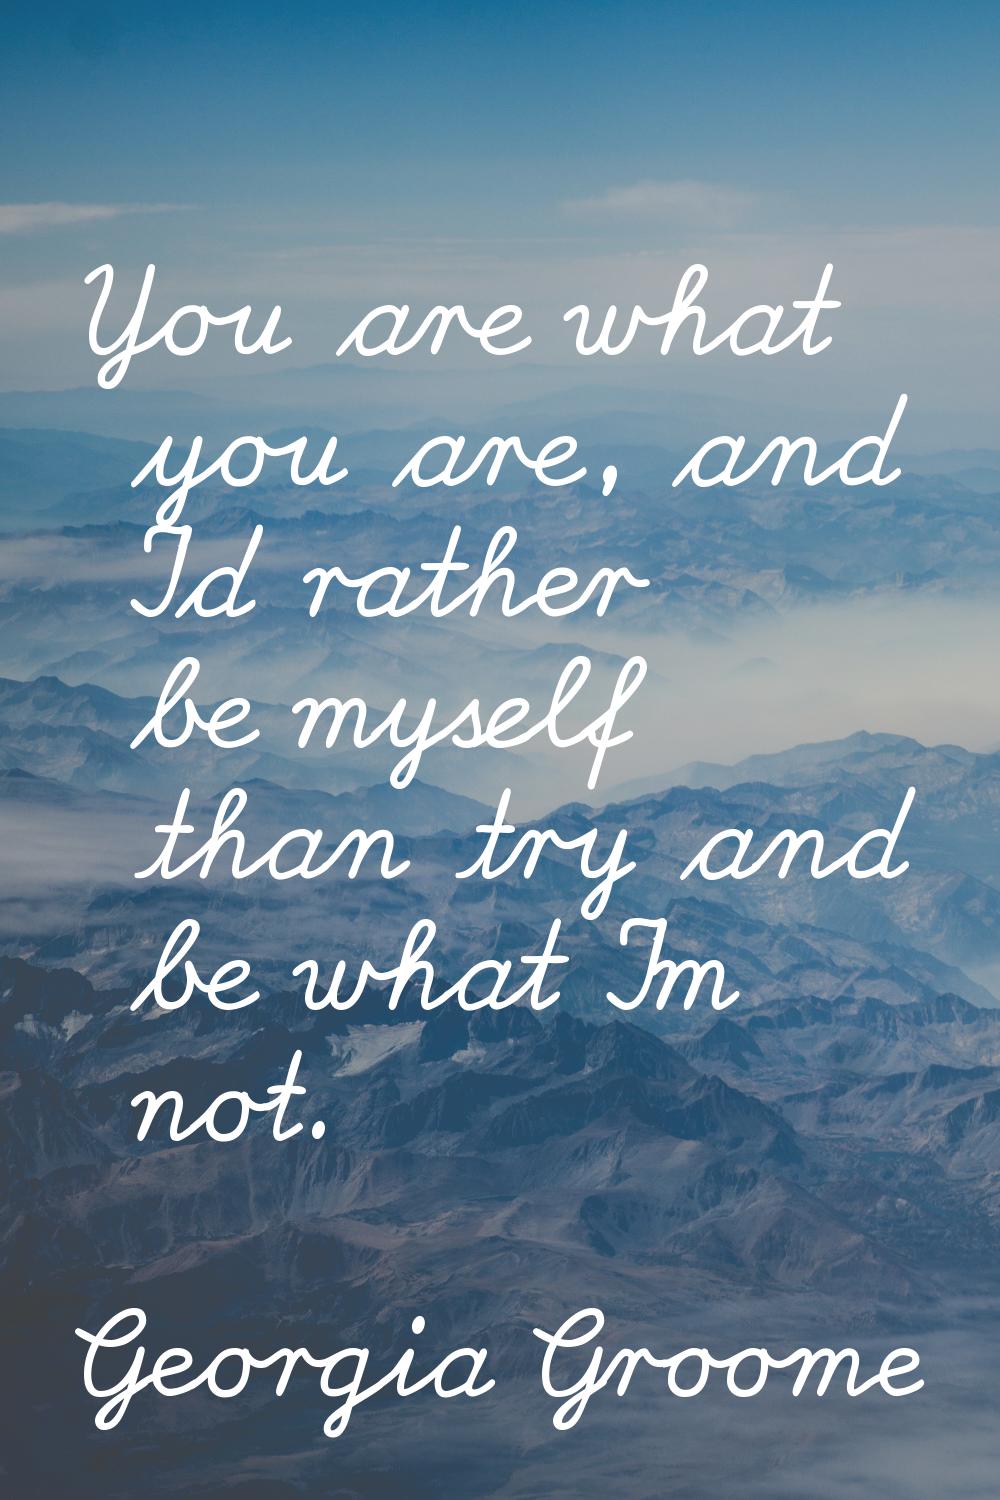 You are what you are, and I'd rather be myself than try and be what I'm not.